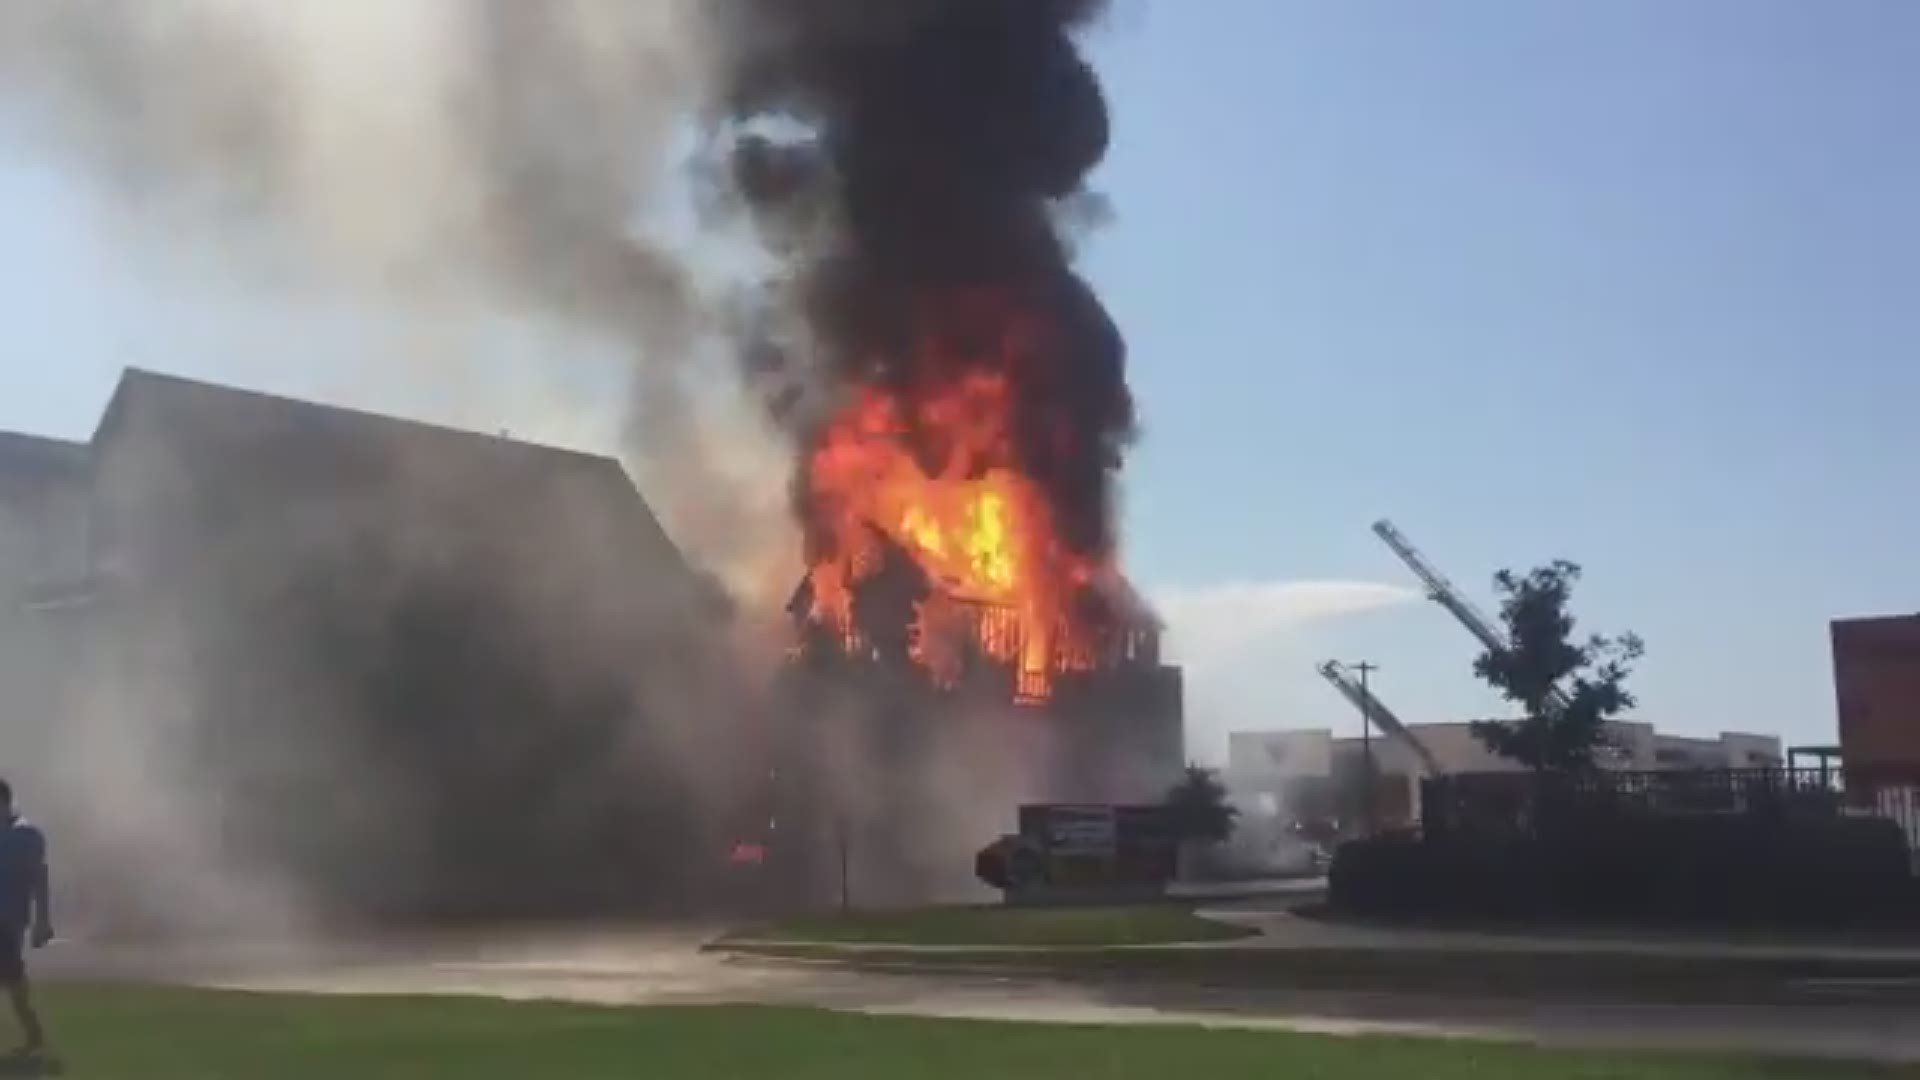 The townhouse was under construction when it erupted into flames, officials say. The fire occurred Sunday morning near East Renner Road and North Plano Road.